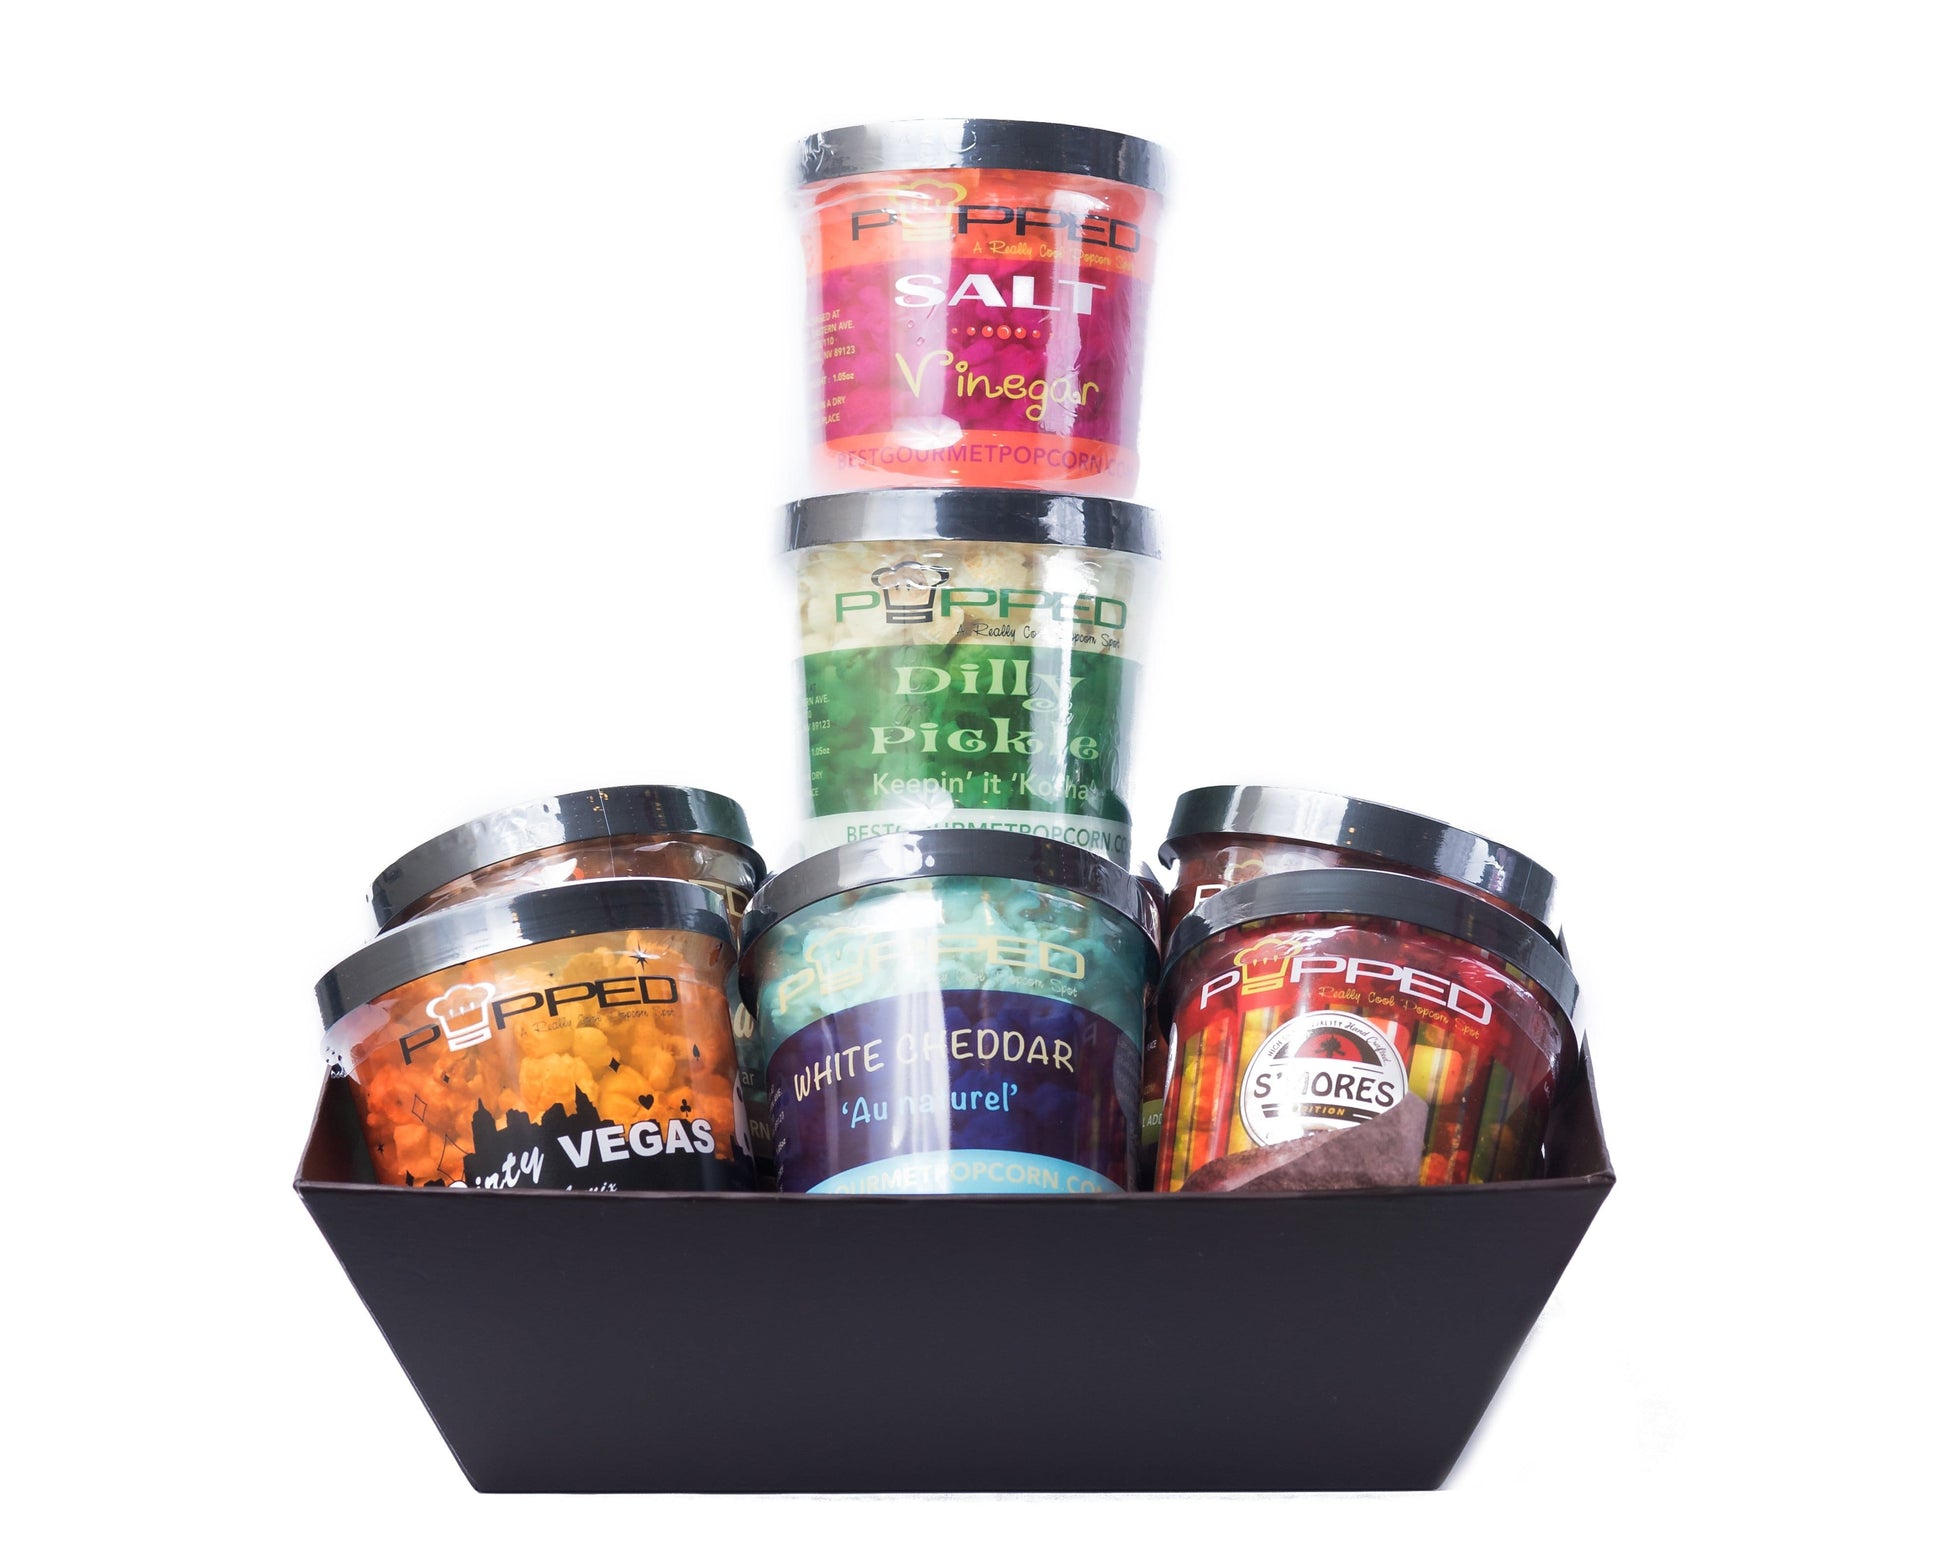 and-crafted in small batches, our gourmet popcorn is prepared using the finest ingredients.  This gourmet popcorn gift basket is made of top rated gourmet popcorn that is the best online